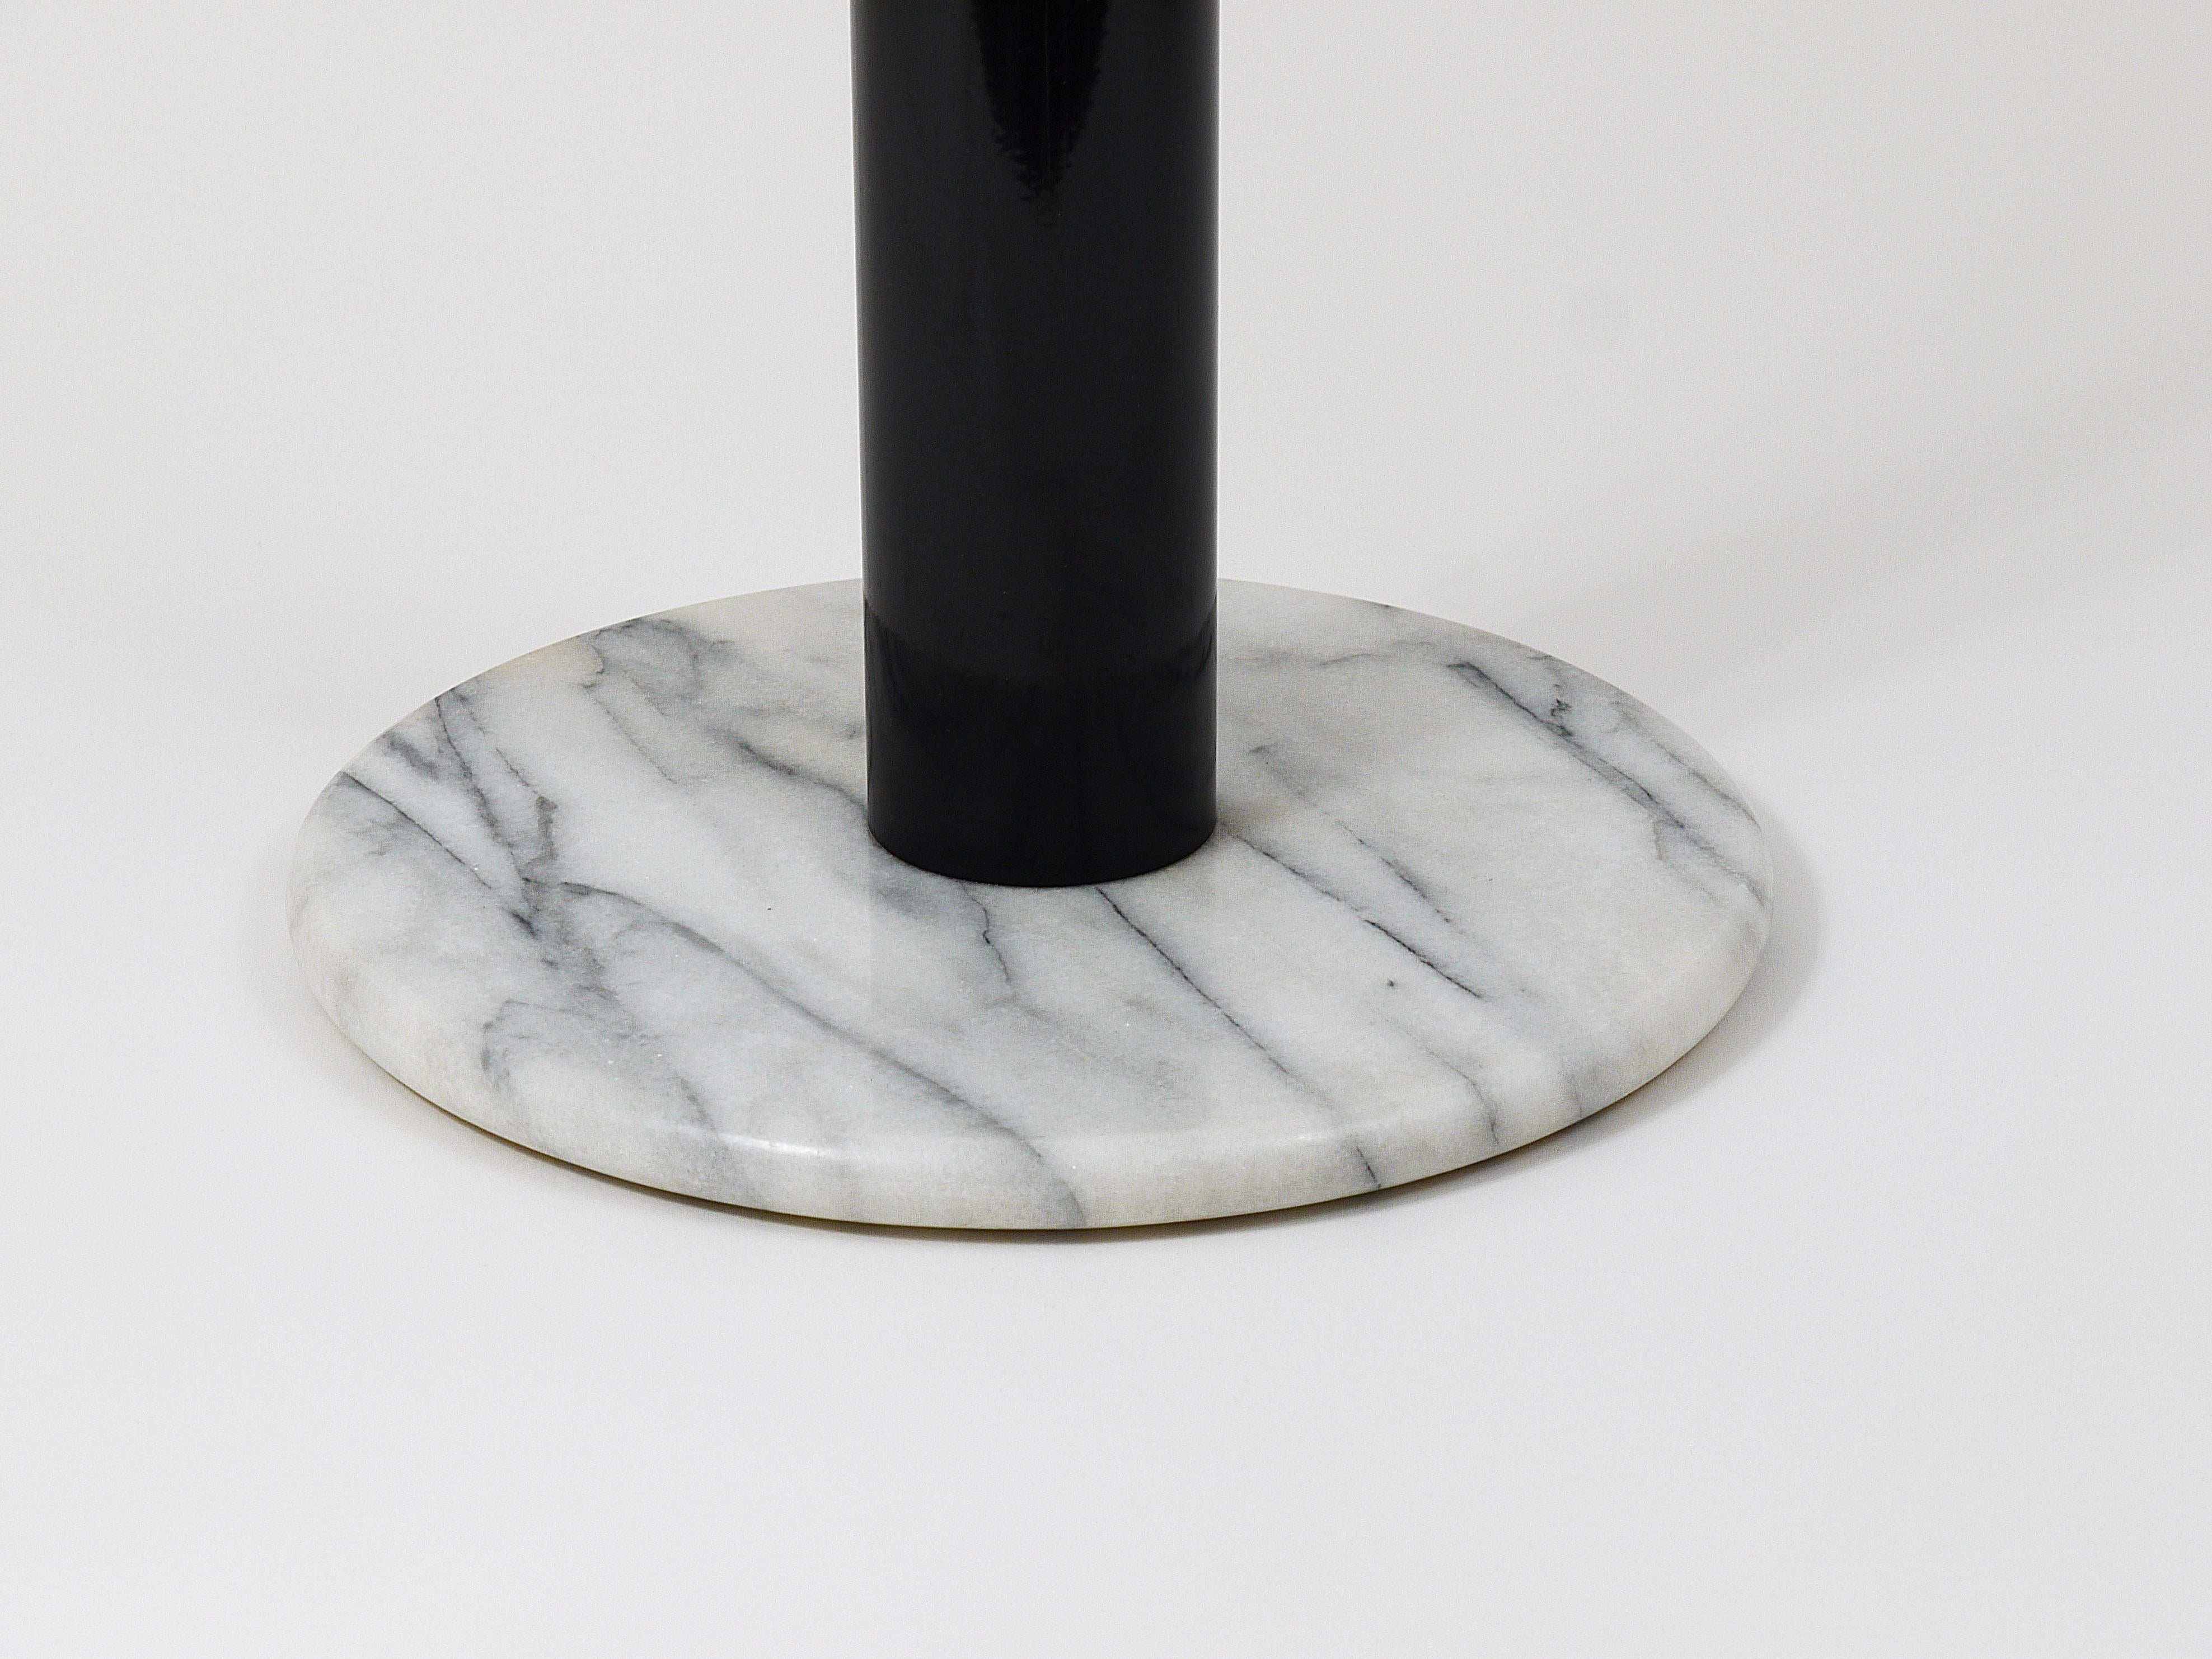 Postmodern White Carrara Marble Flower Stand Pedestal Table, Italy, 1980s For Sale 4